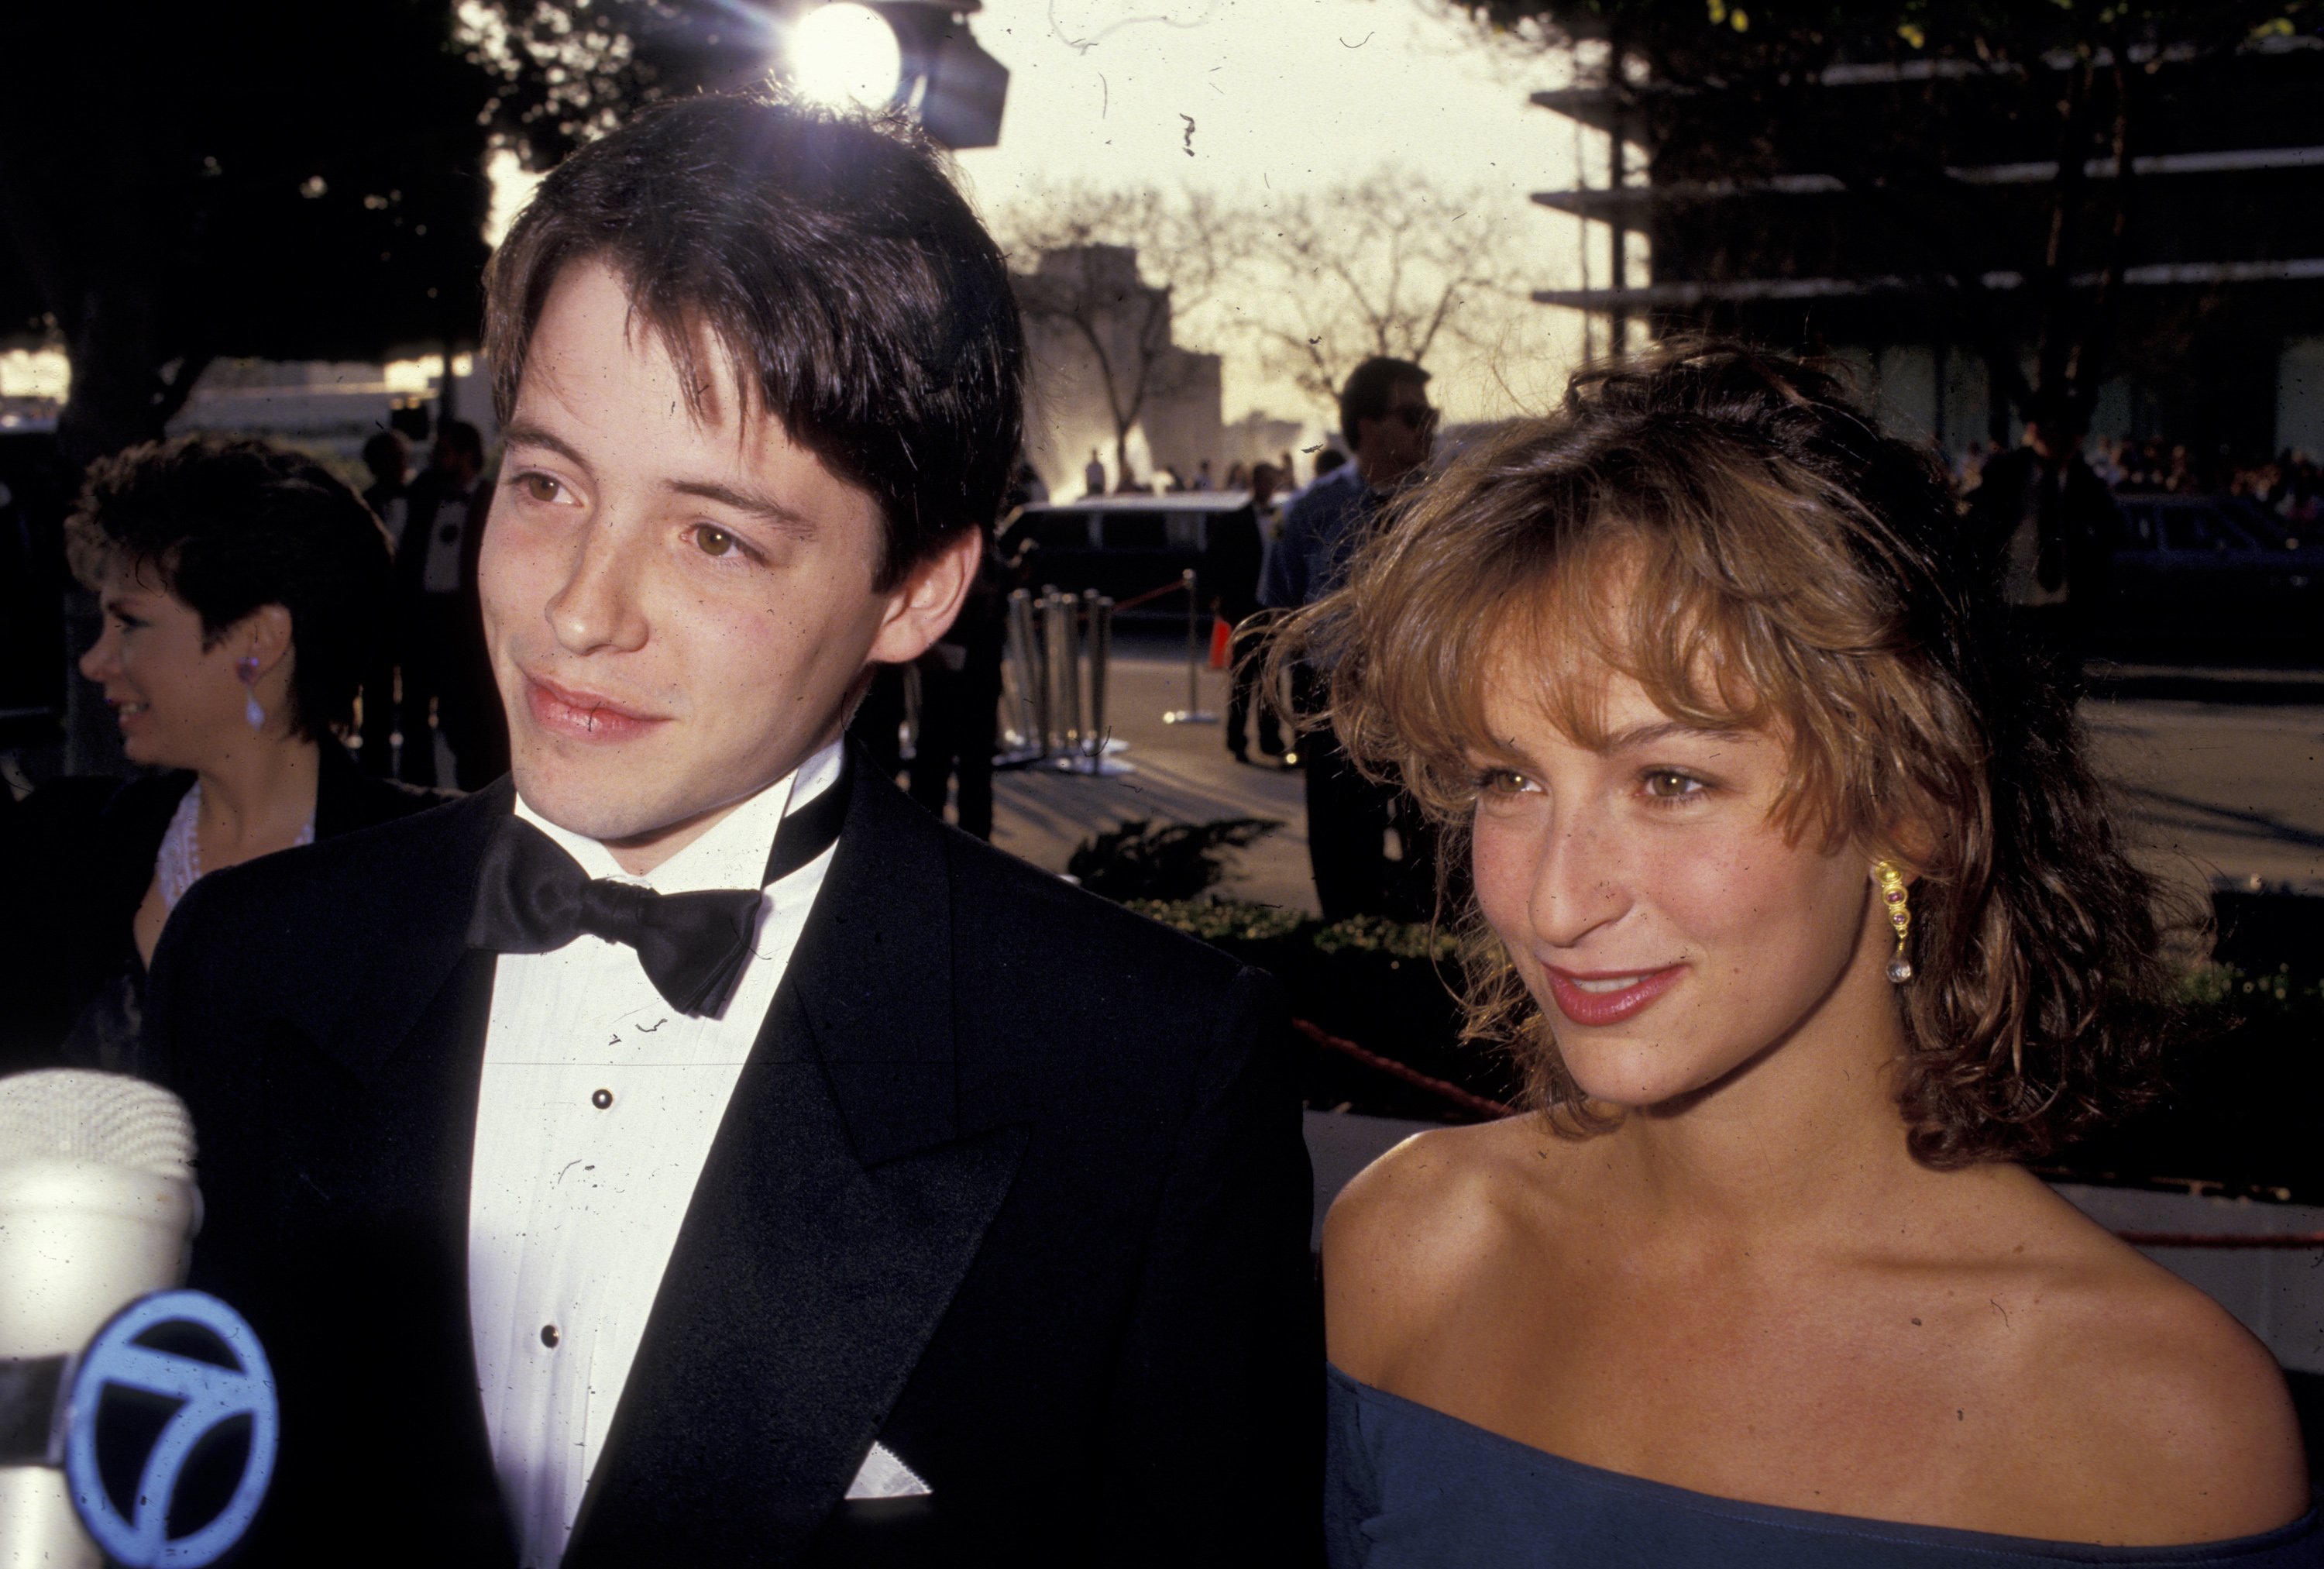 Matthew Broderick and Jennifer Grey during 59th Annual Academy Awards at Shrine Auditorium in Los Angeles, California | Source: Getty Images